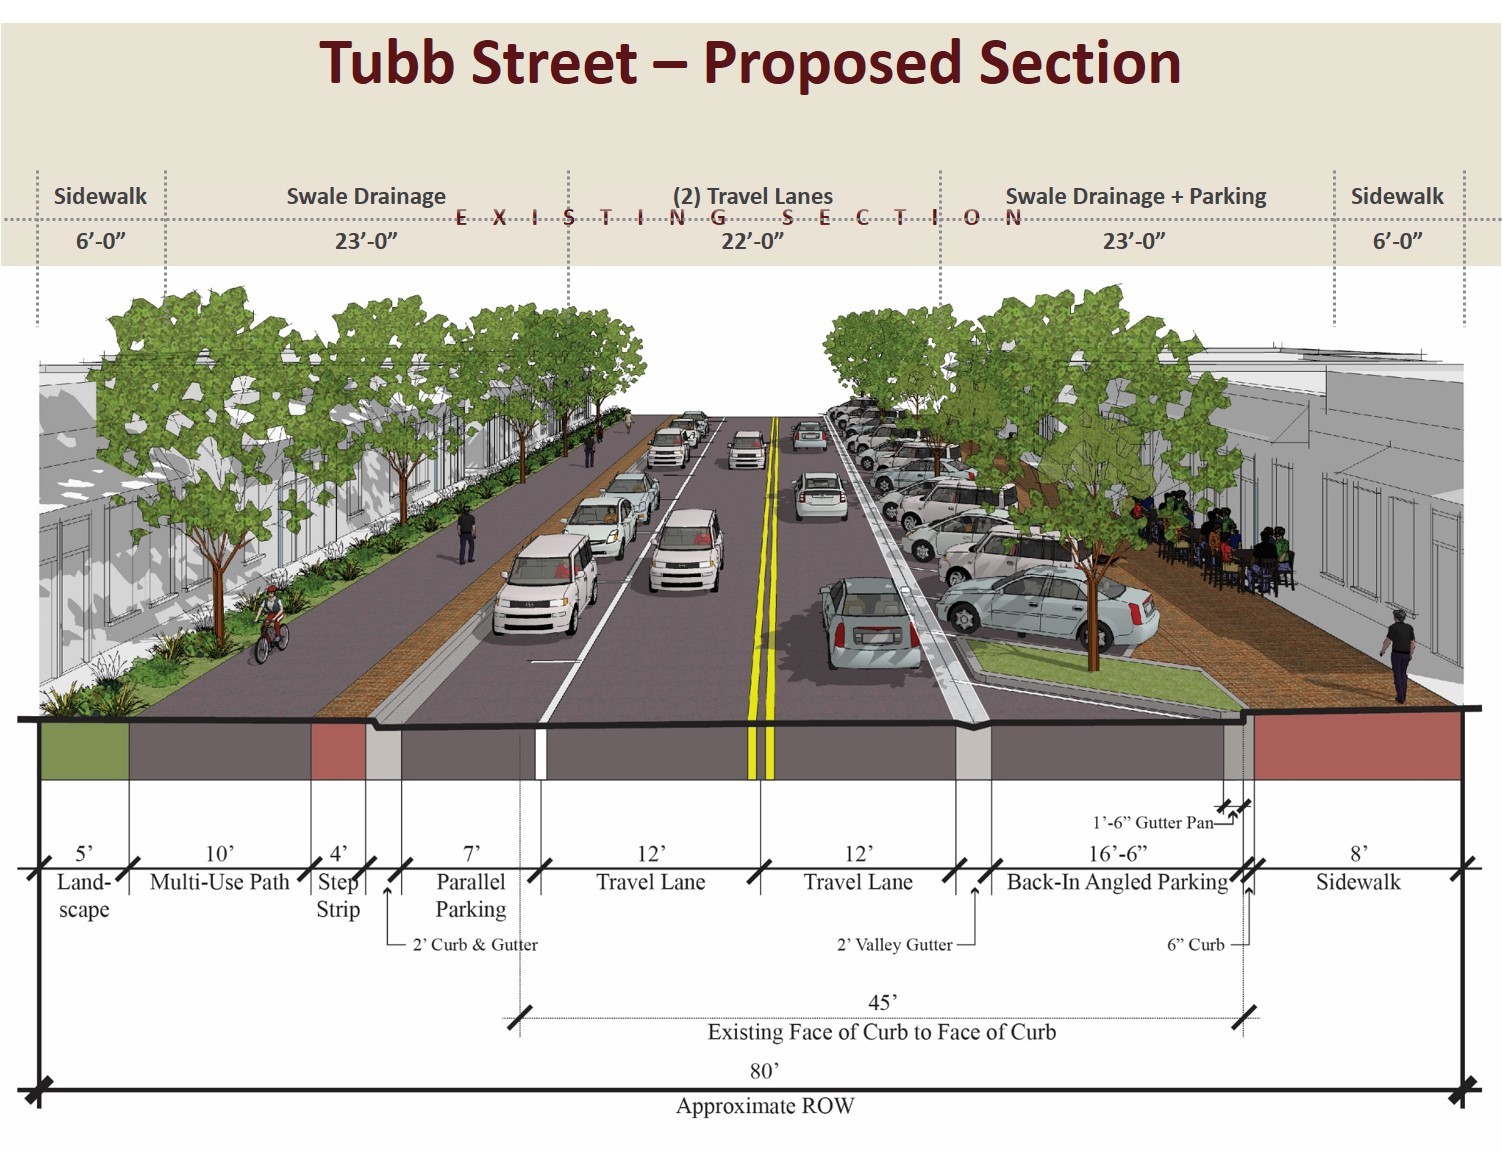 This alternative considers the extension of the West Orange Trail with a 10-foot shared-use path on the west side of the street and on-street parking on both sides.